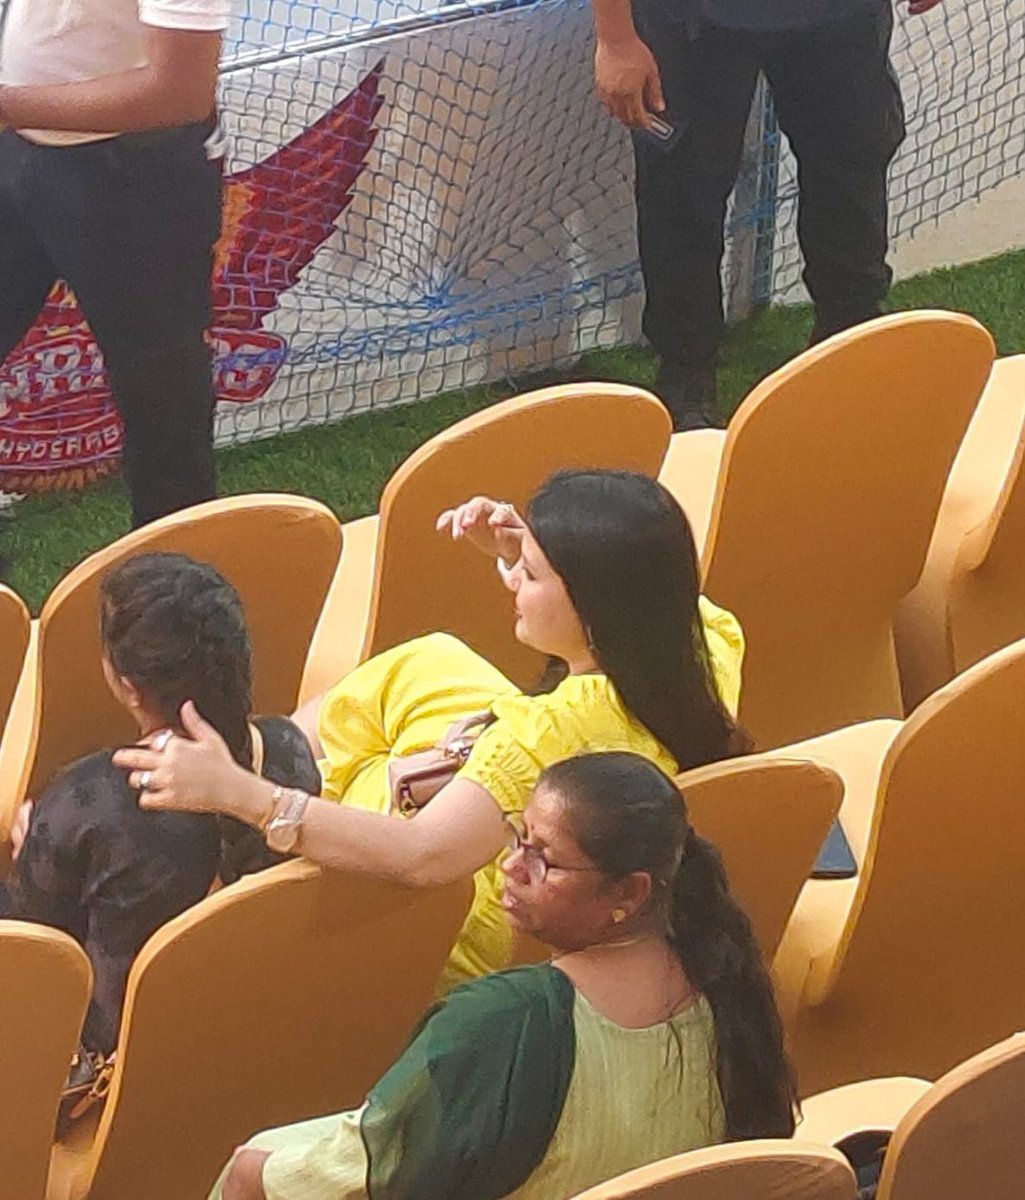 Sakshi and Ziva are here to cheer for Dhoni.